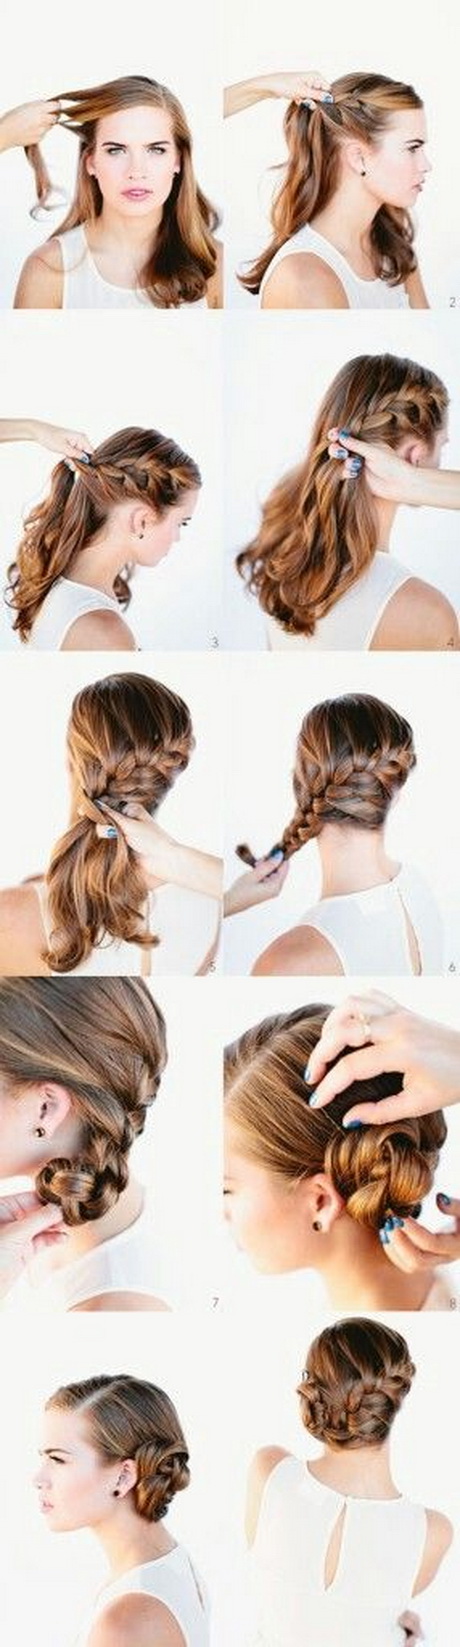 Quick and easy prom hairstyles quick-and-easy-prom-hairstyles-44_16